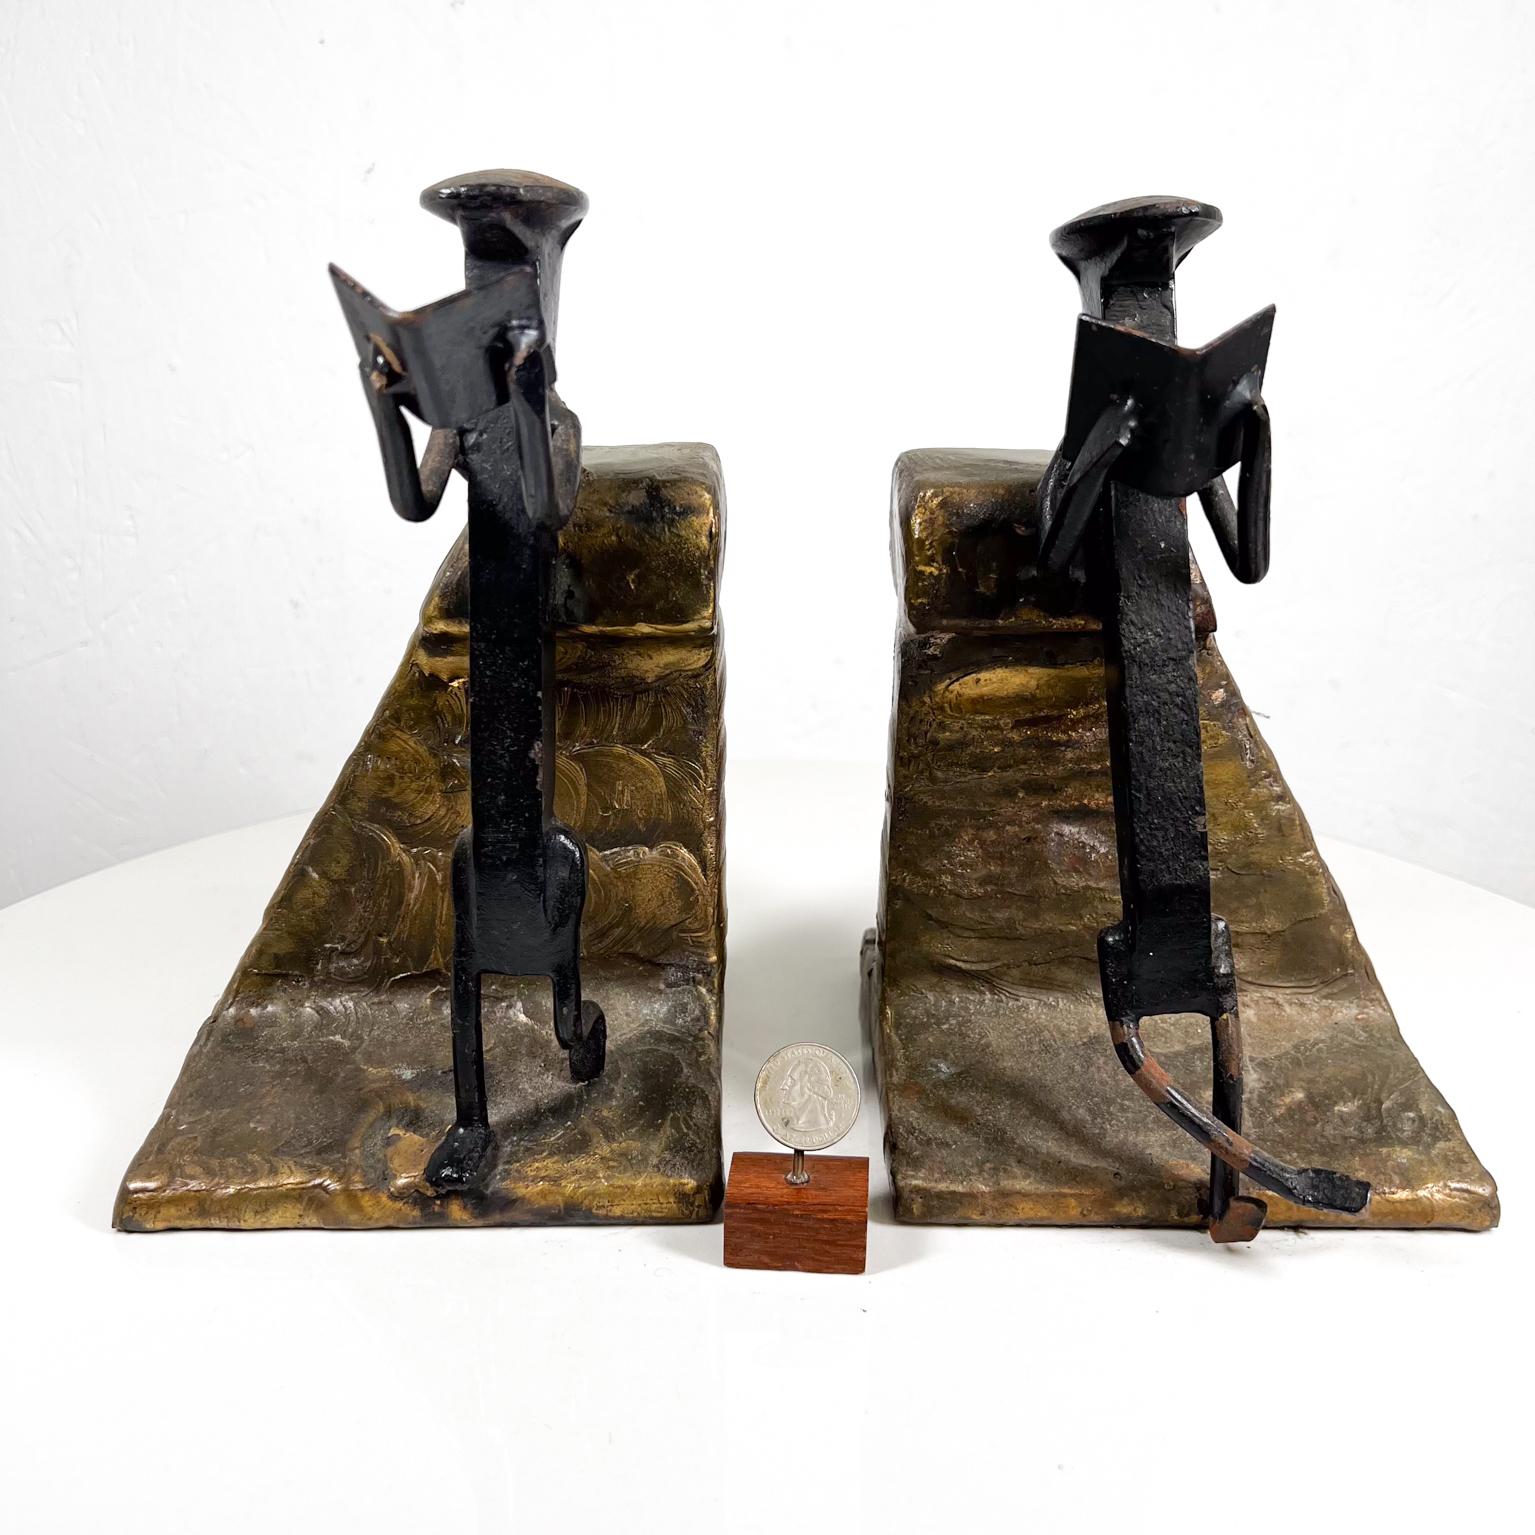 1968 Modernist Railway Spike Bookends 
Signed
5.63 d x 6.88 long x 9 h
Preowned original vintage condition.
Heavy item.
Please review all images.


